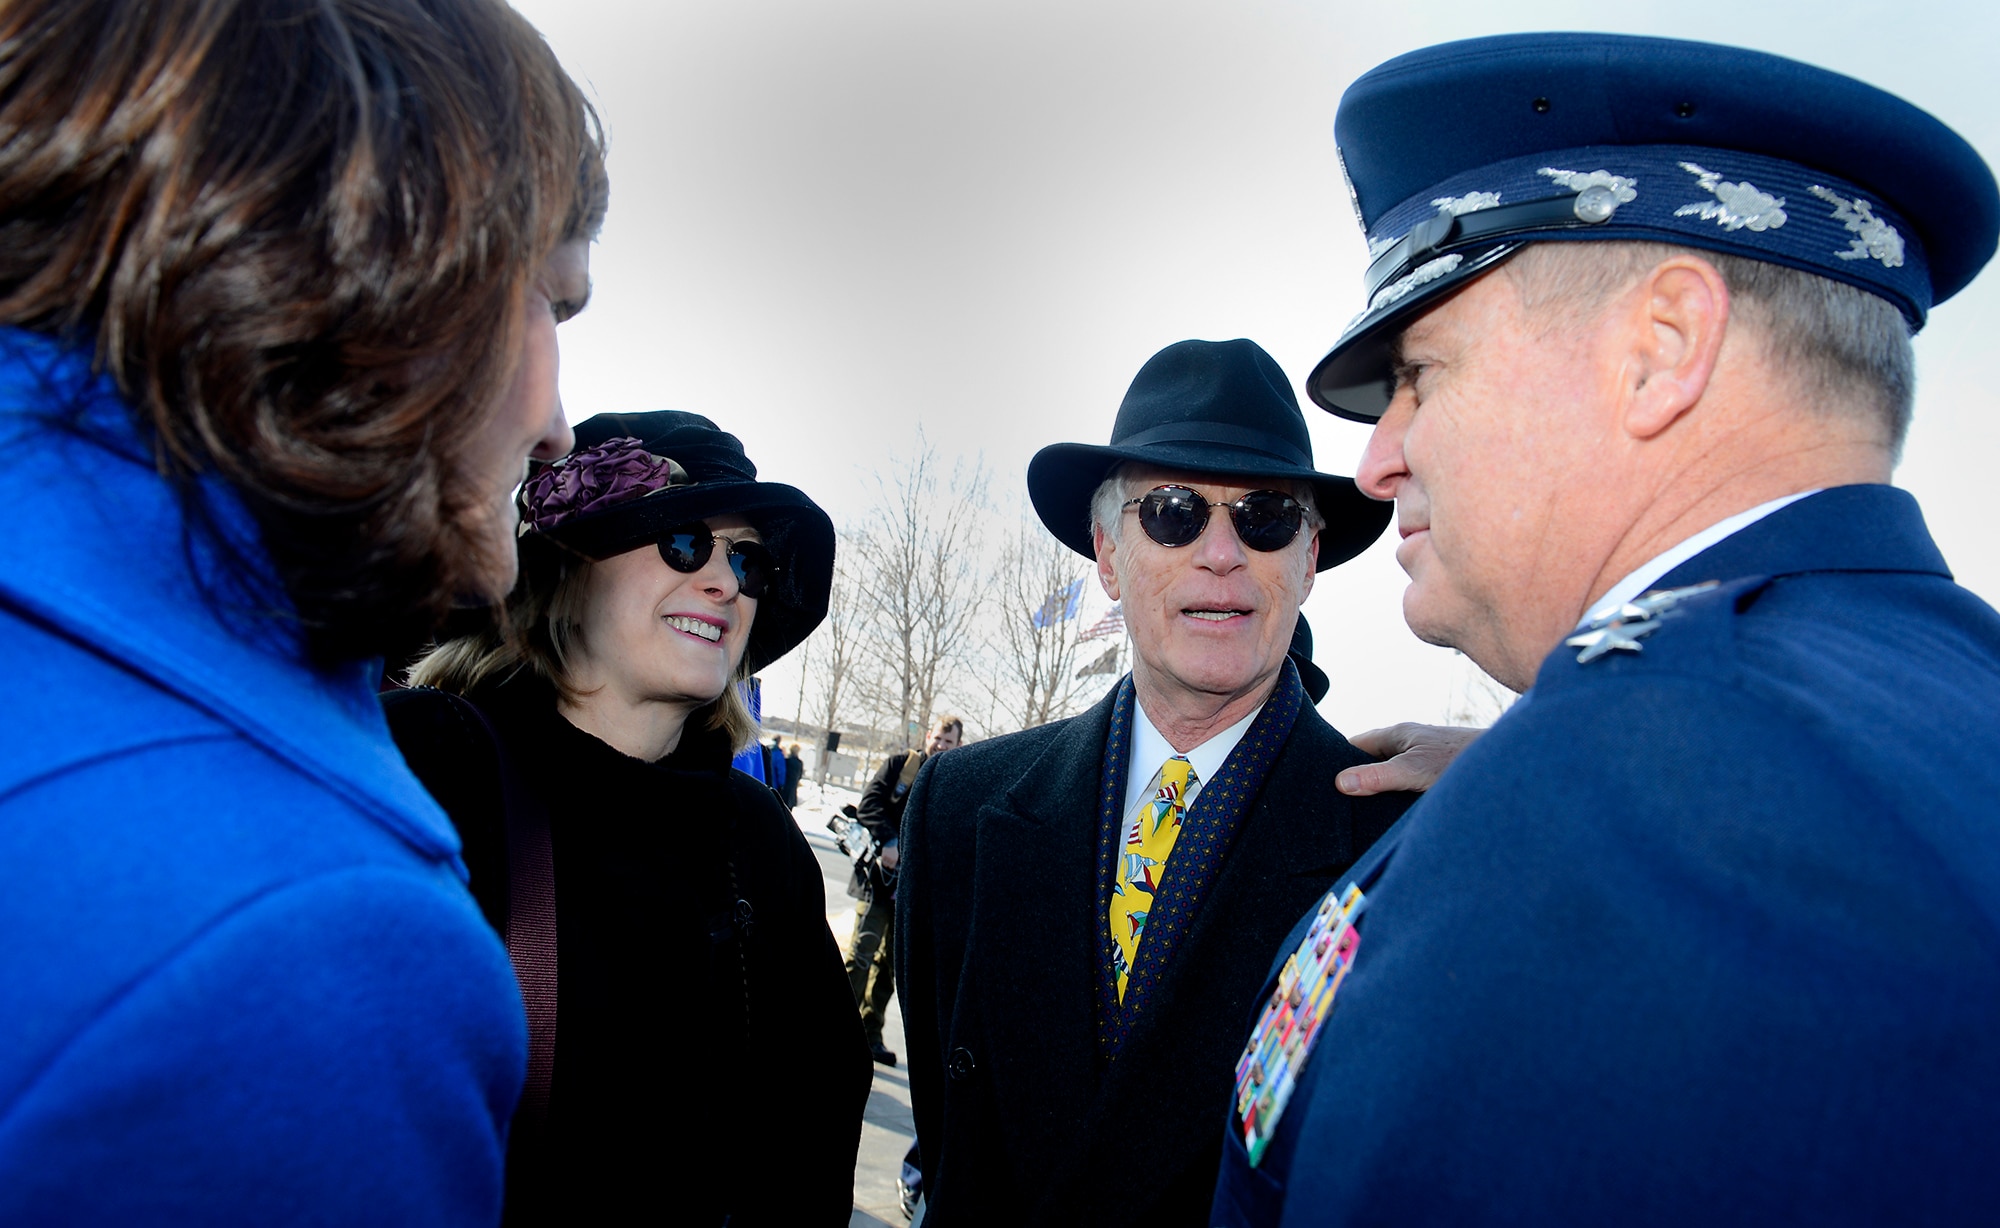 Air Force Chief of Staff Gen. Mark A. Welsh III and his wife, Betty, speak with Bob and Sheila Brudno following a wreath laying ceremony March 2, 2015, at the Air Force Memorial in Arlington, Va. The ceremony honored Air Force Vietnam prisoners of war and missing in action. Bob's brother Capt. Alan Brudno, was a Vietnam POW. (U.S. Air Force photo/Scott M. Ash)